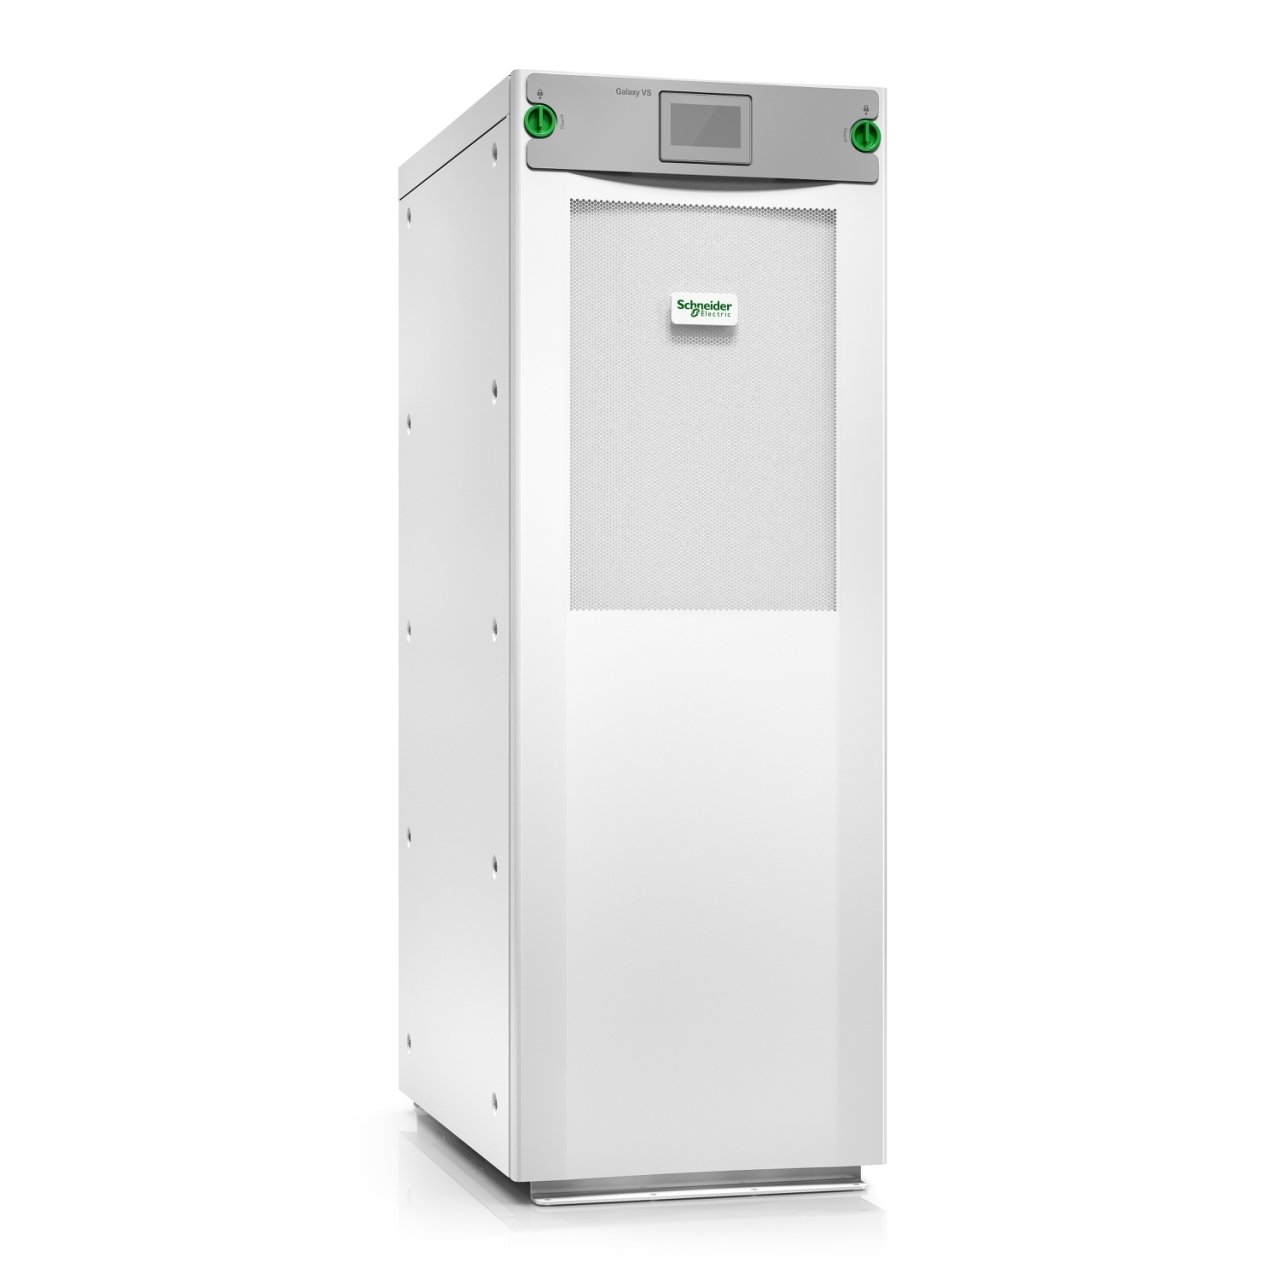 Galaxy VS UPS 30kW 480V with N+1 power module, for 5 smart modular 9Ah battery strings, Start-up 5x8